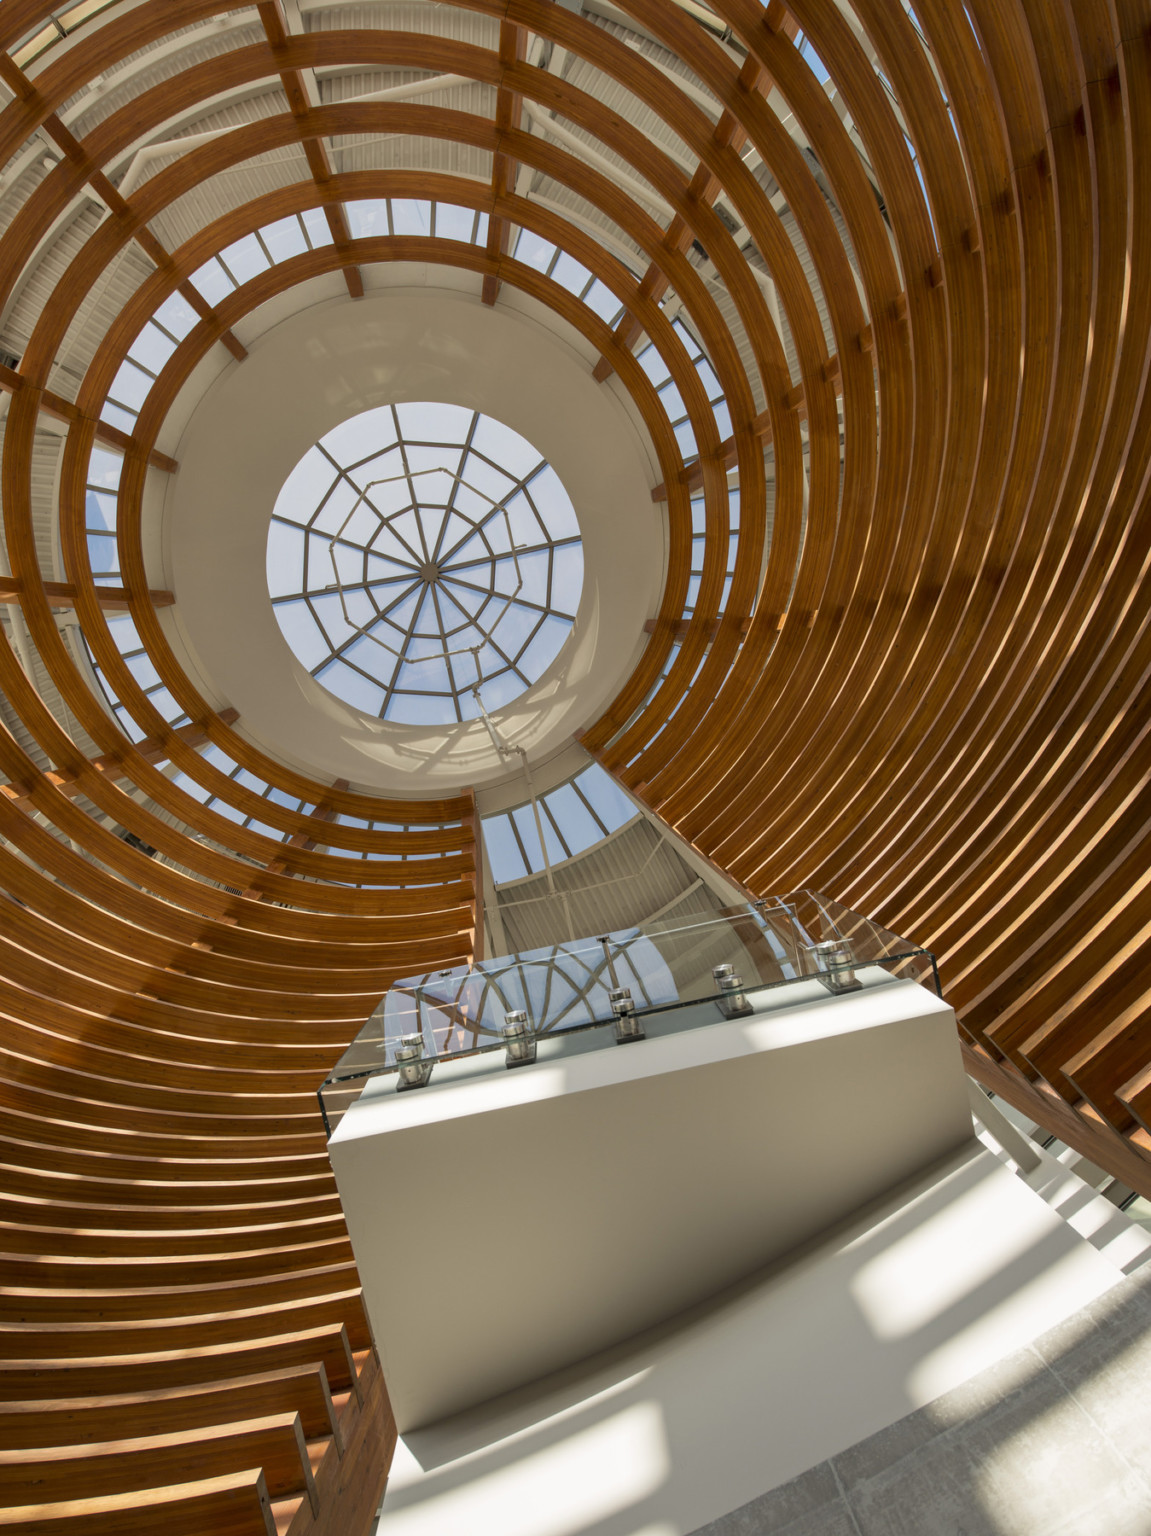 wood grid sections curve into a rotunda with view of sky above at Pueblo County Judicial Center